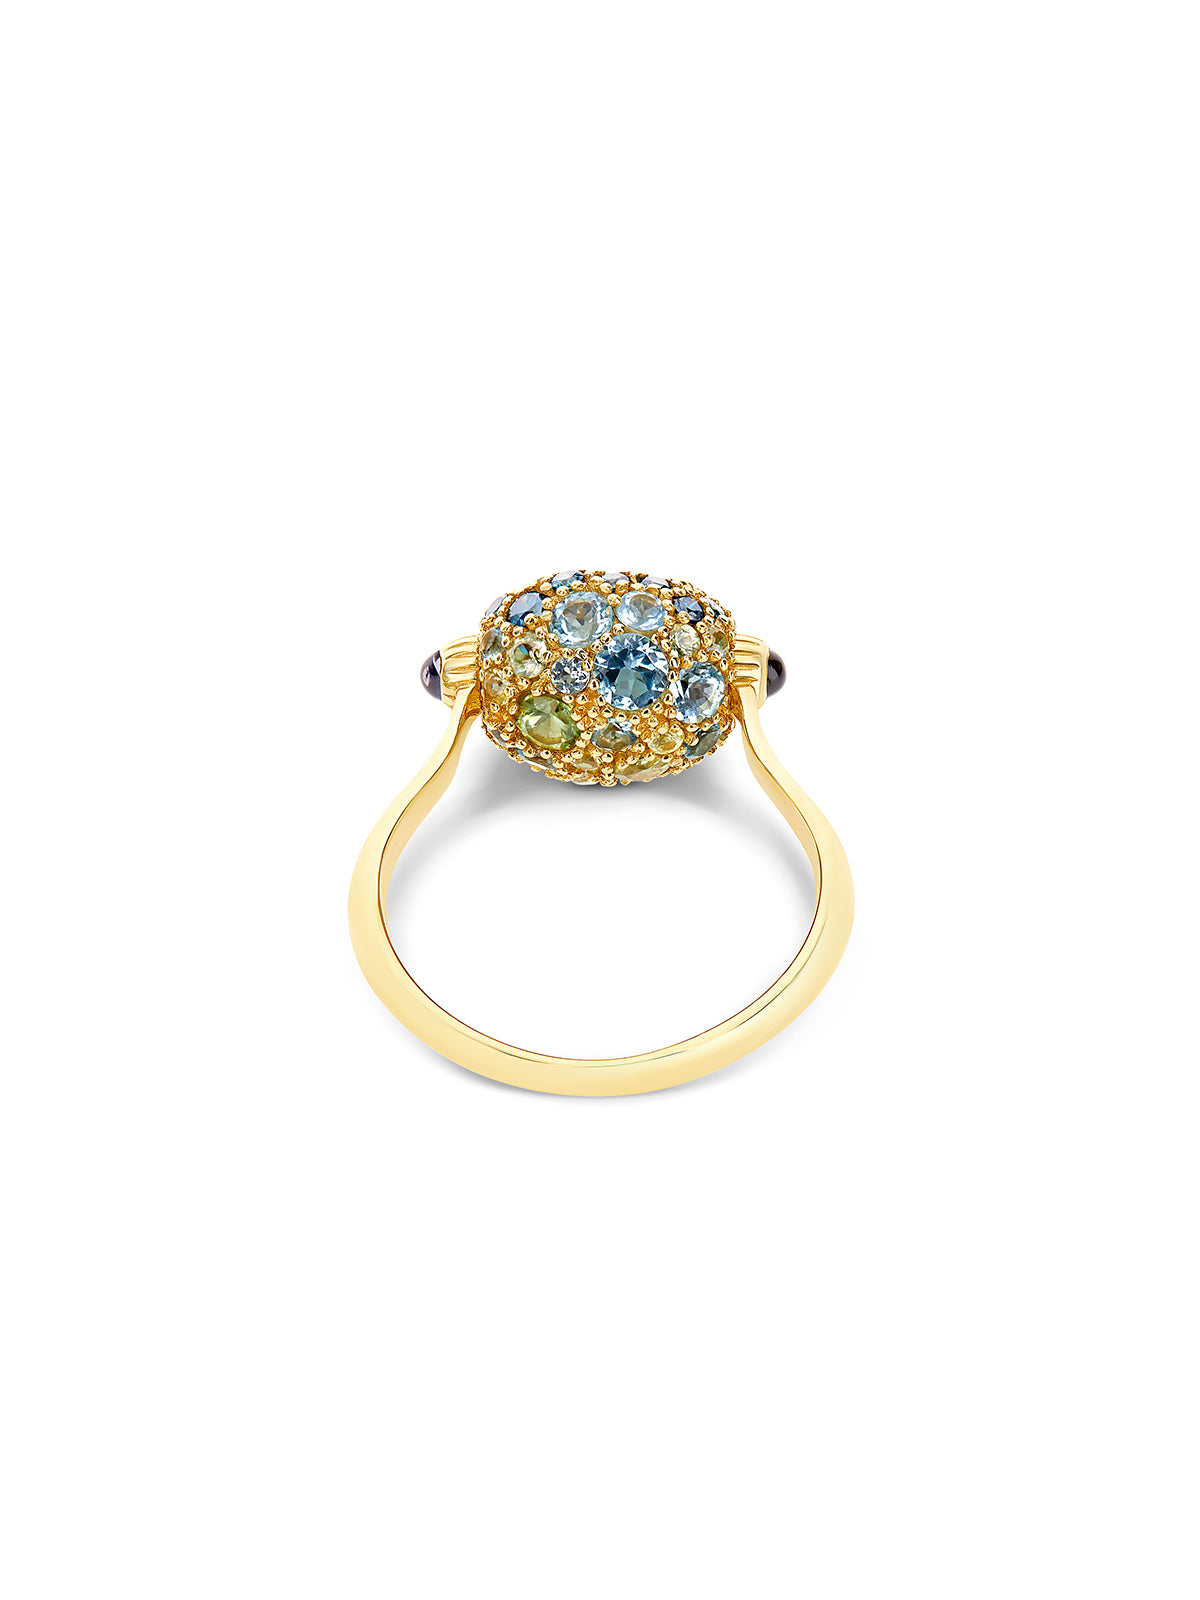 "Reverse" Gold, Blue Diamonds, Swiss Blue Topaz, Green Sapphires and London Blue Topaz Double-face Ring (SMALL)